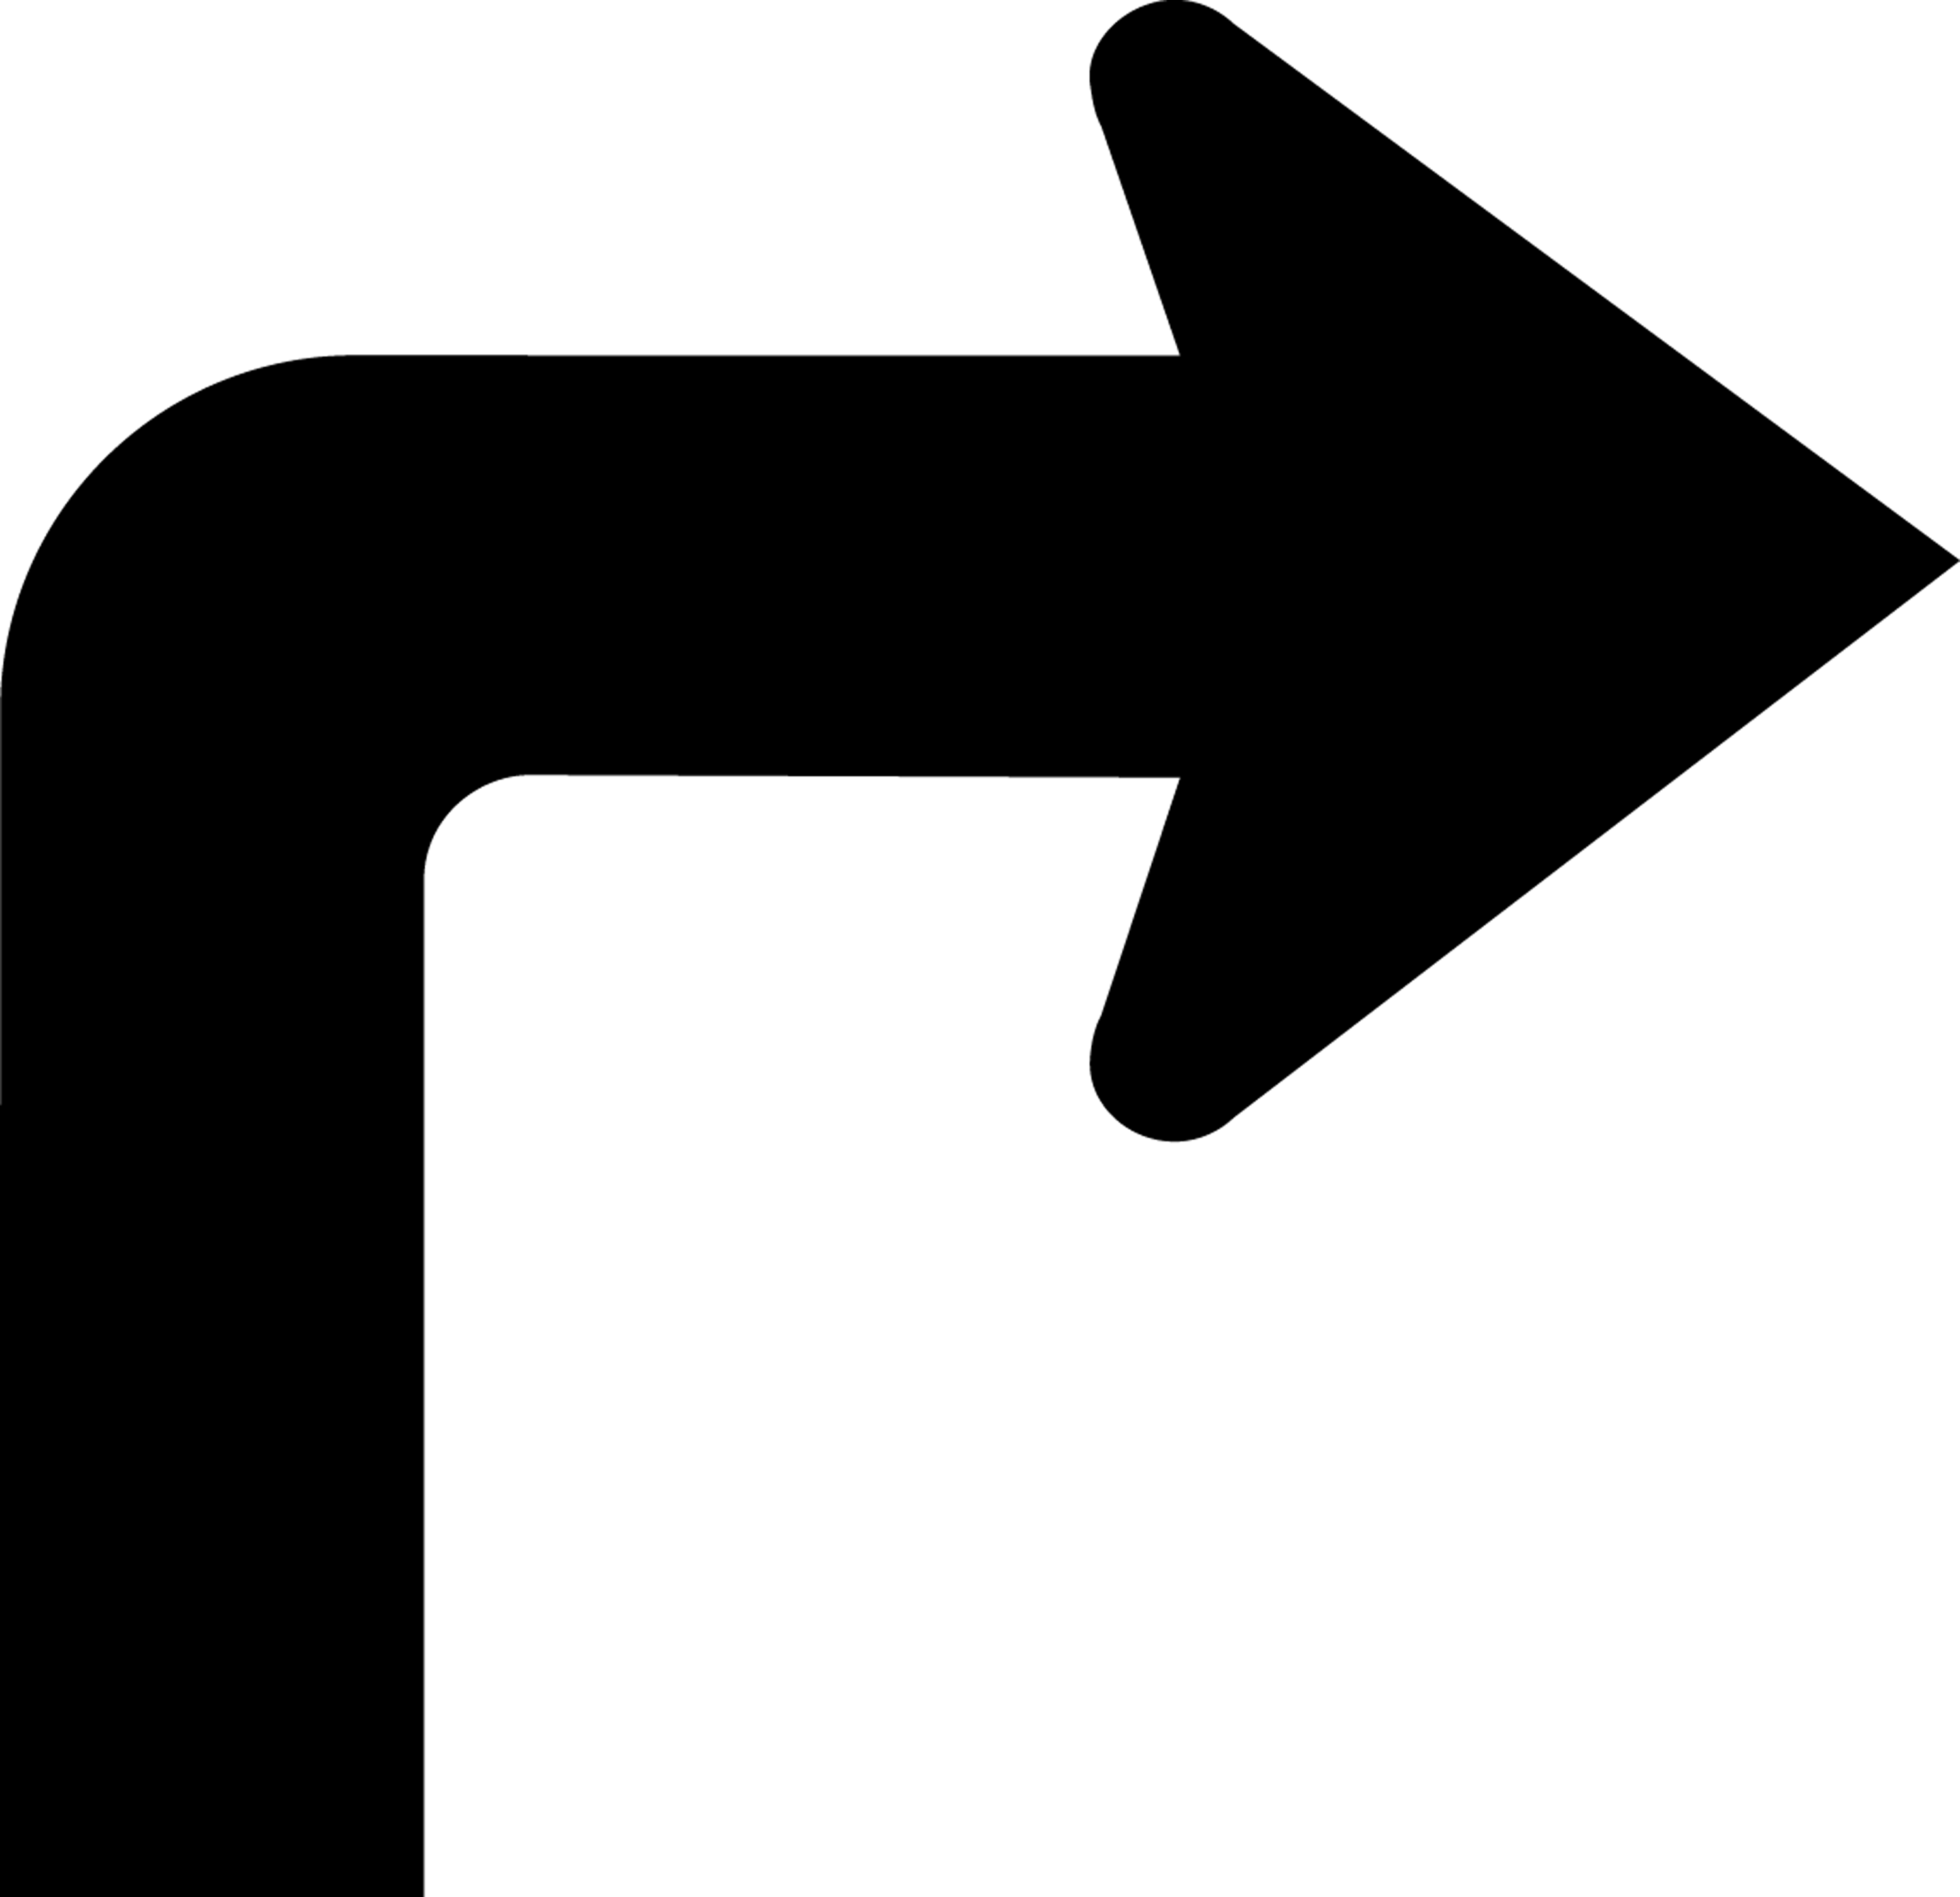 Right Turn, Silhouette | ClipArt ETC